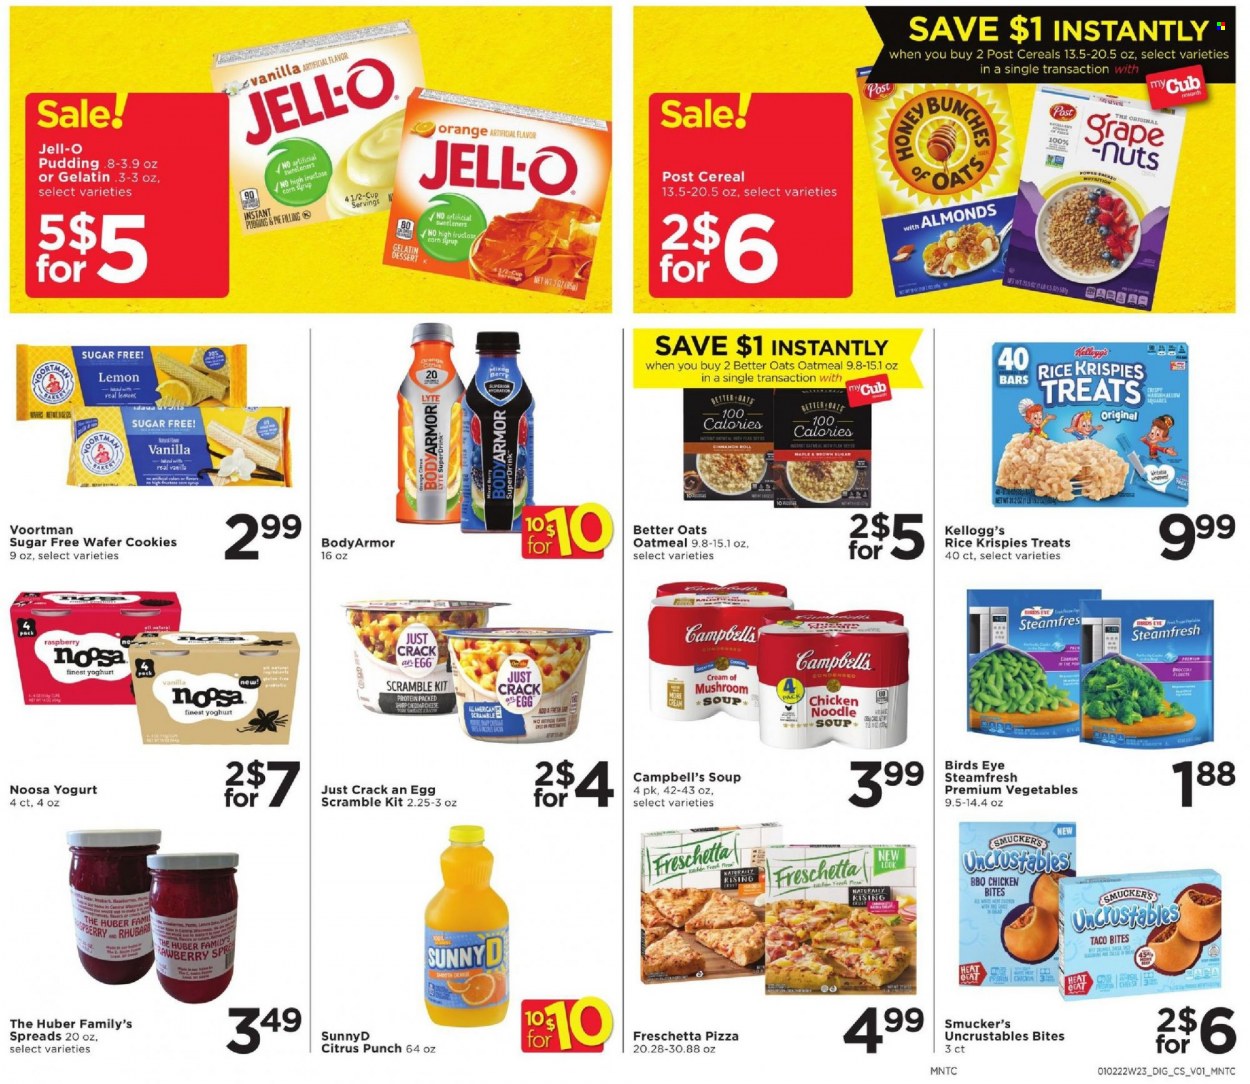 thumbnail - Cub Foods Flyer - 01/02/2022 - 01/08/2022 - Sales products - cinnamon roll, corn, oranges, Campbell's, pizza, soup, Bird's Eye, noodles, pudding, yoghurt, chicken bites, cookies, wafers, Kellogg's, oatmeal, oats, Jell-O, cereals, Rice Krispies, corn syrup, syrup, fruit punch, lemons. Page 4.